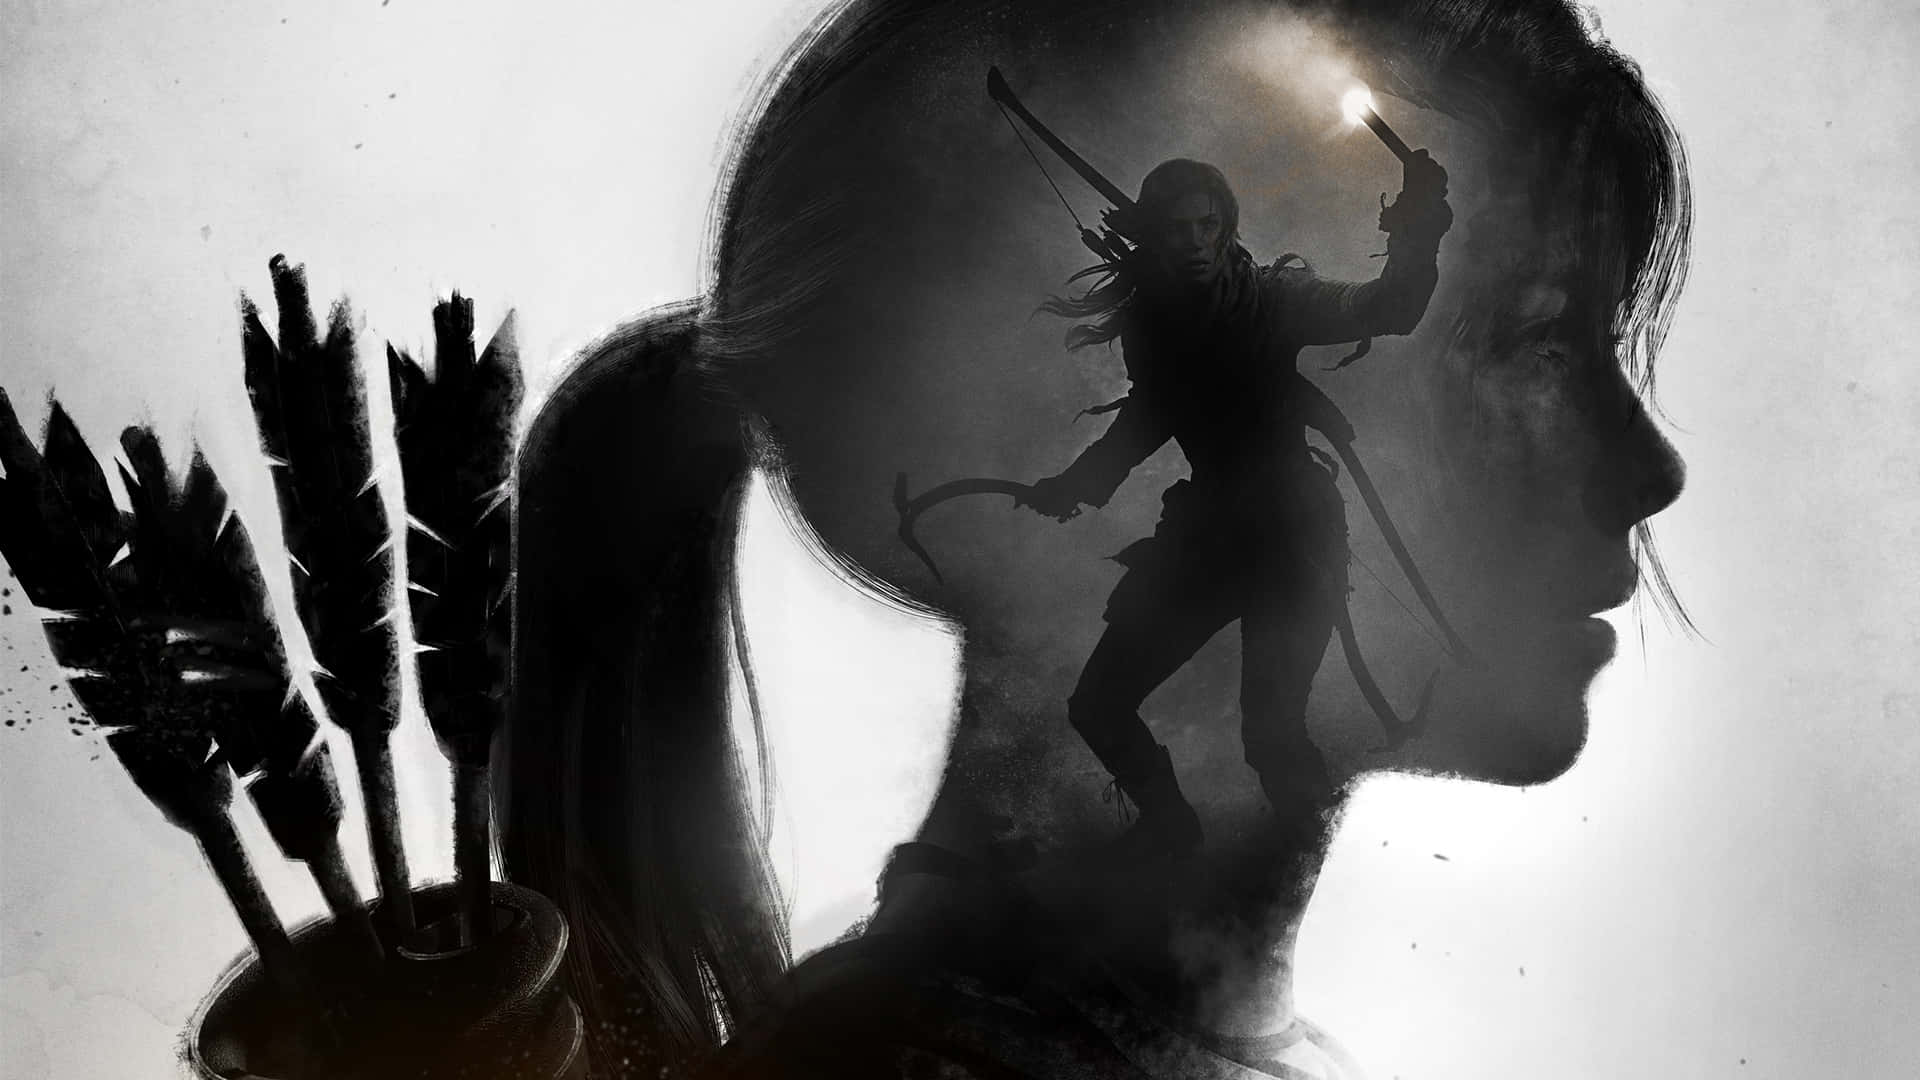 The Tomb Raider - A Silhouette Of A Woman Holding Arrows